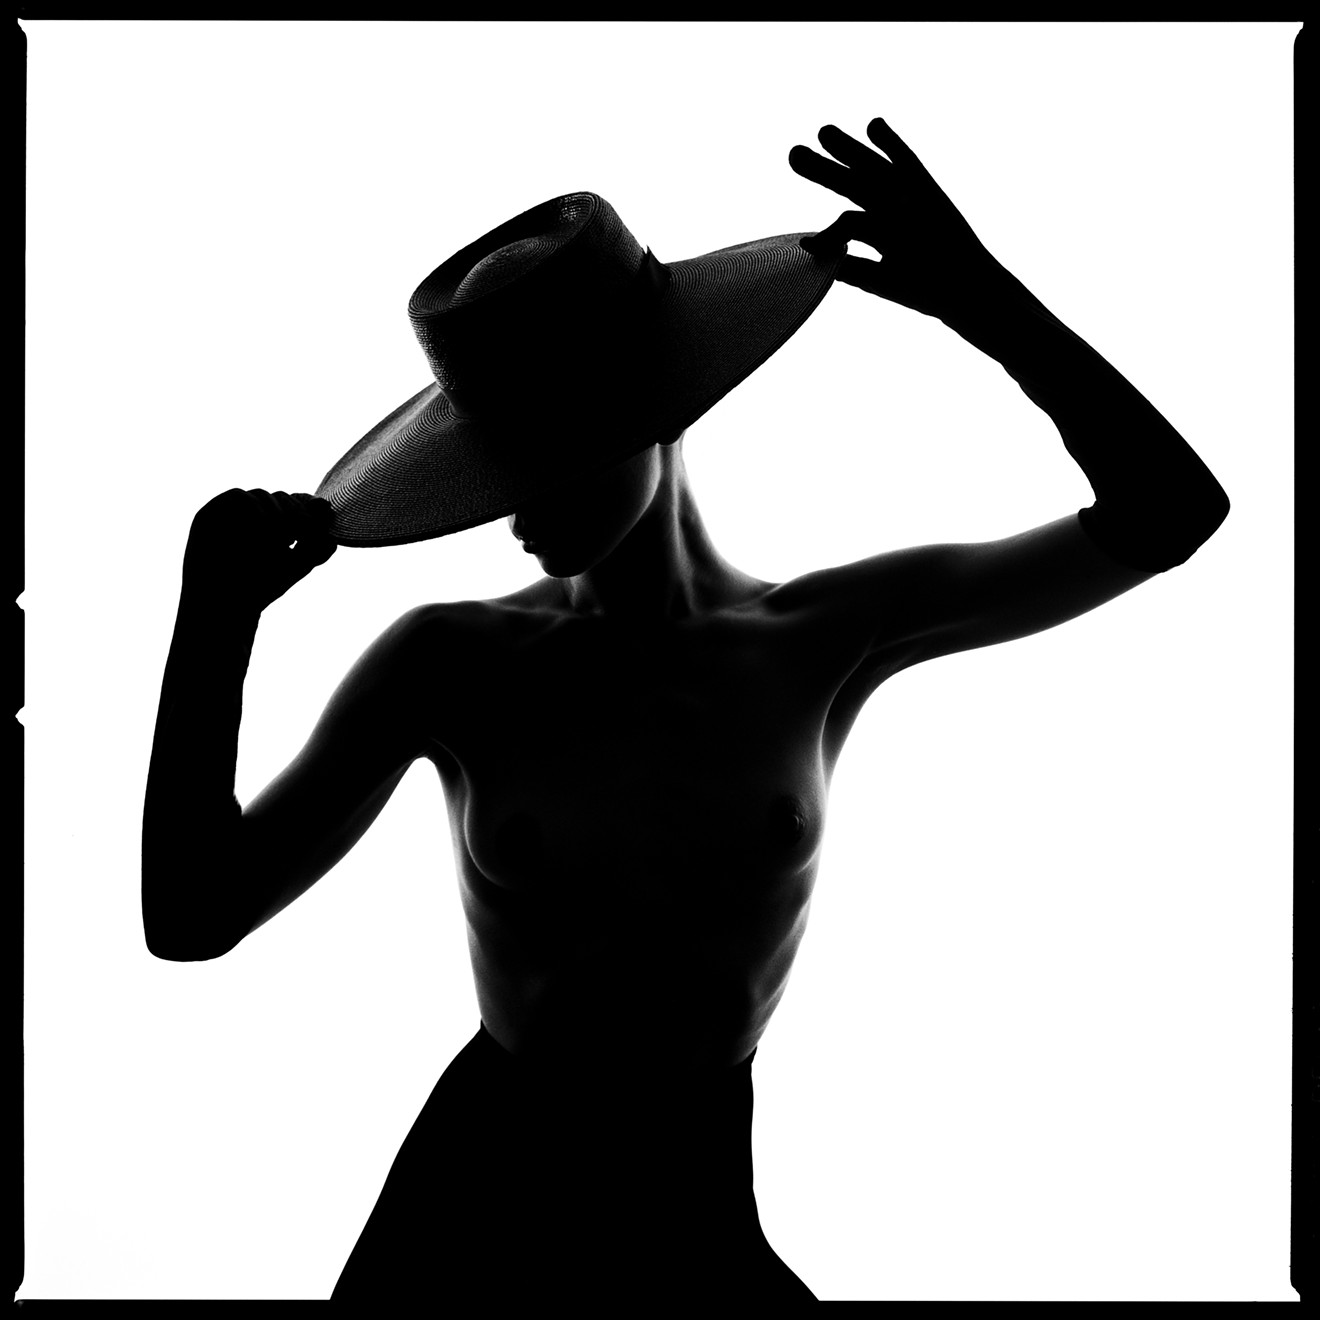 A portrait of a woman wearing a hat included in Tyler Shields's Silhouette series.